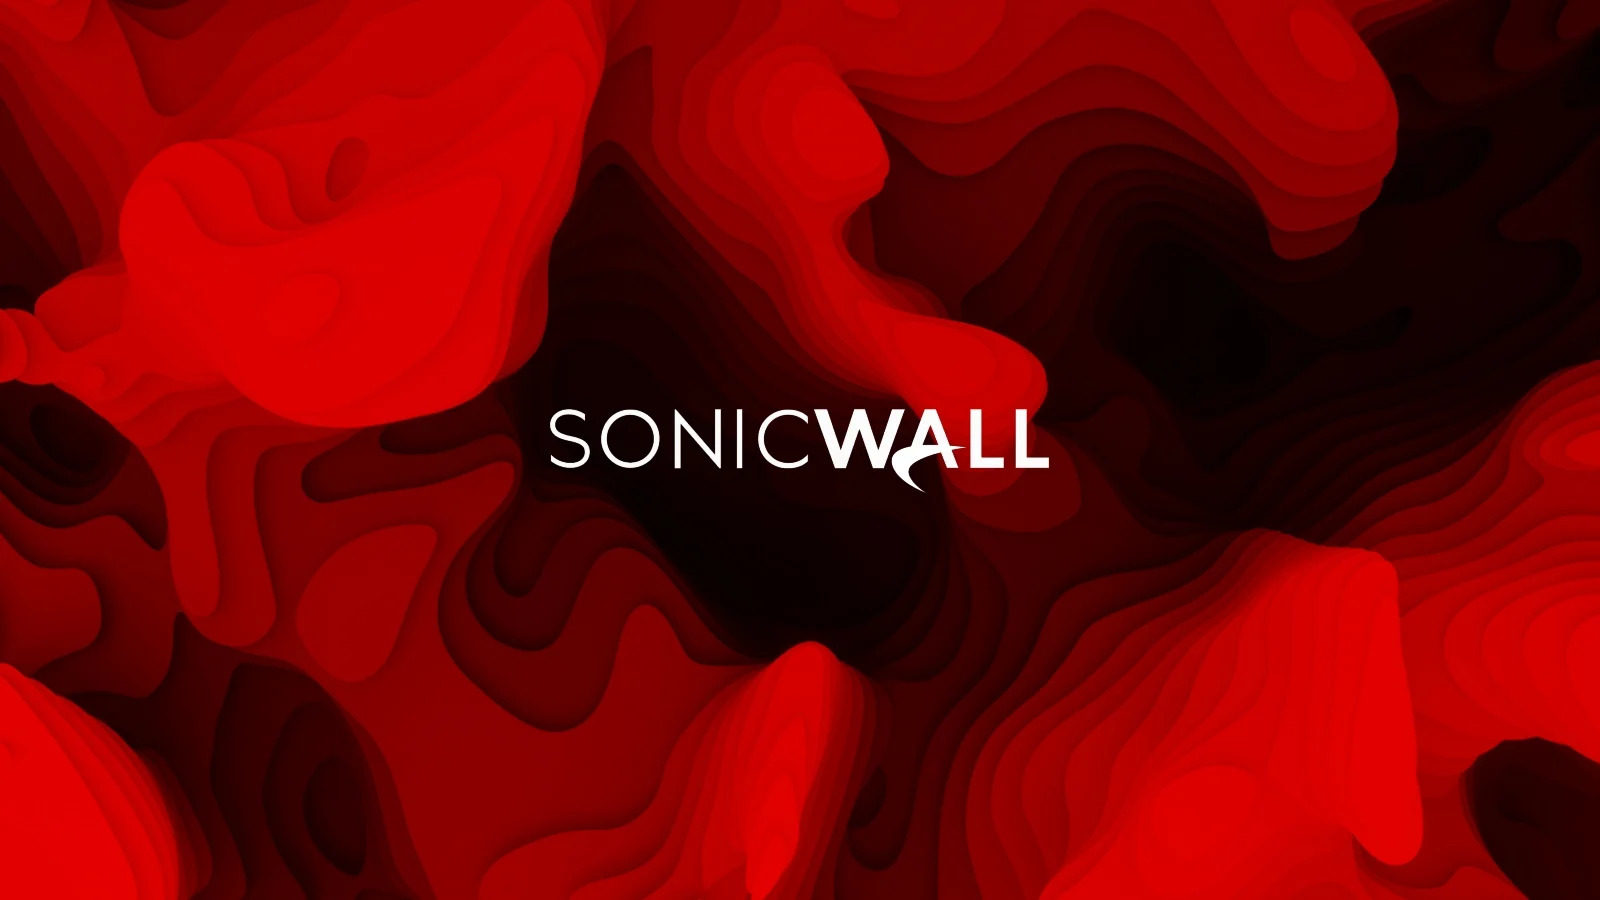 Sonicwall | SOSECURE MORE THAN SECURE